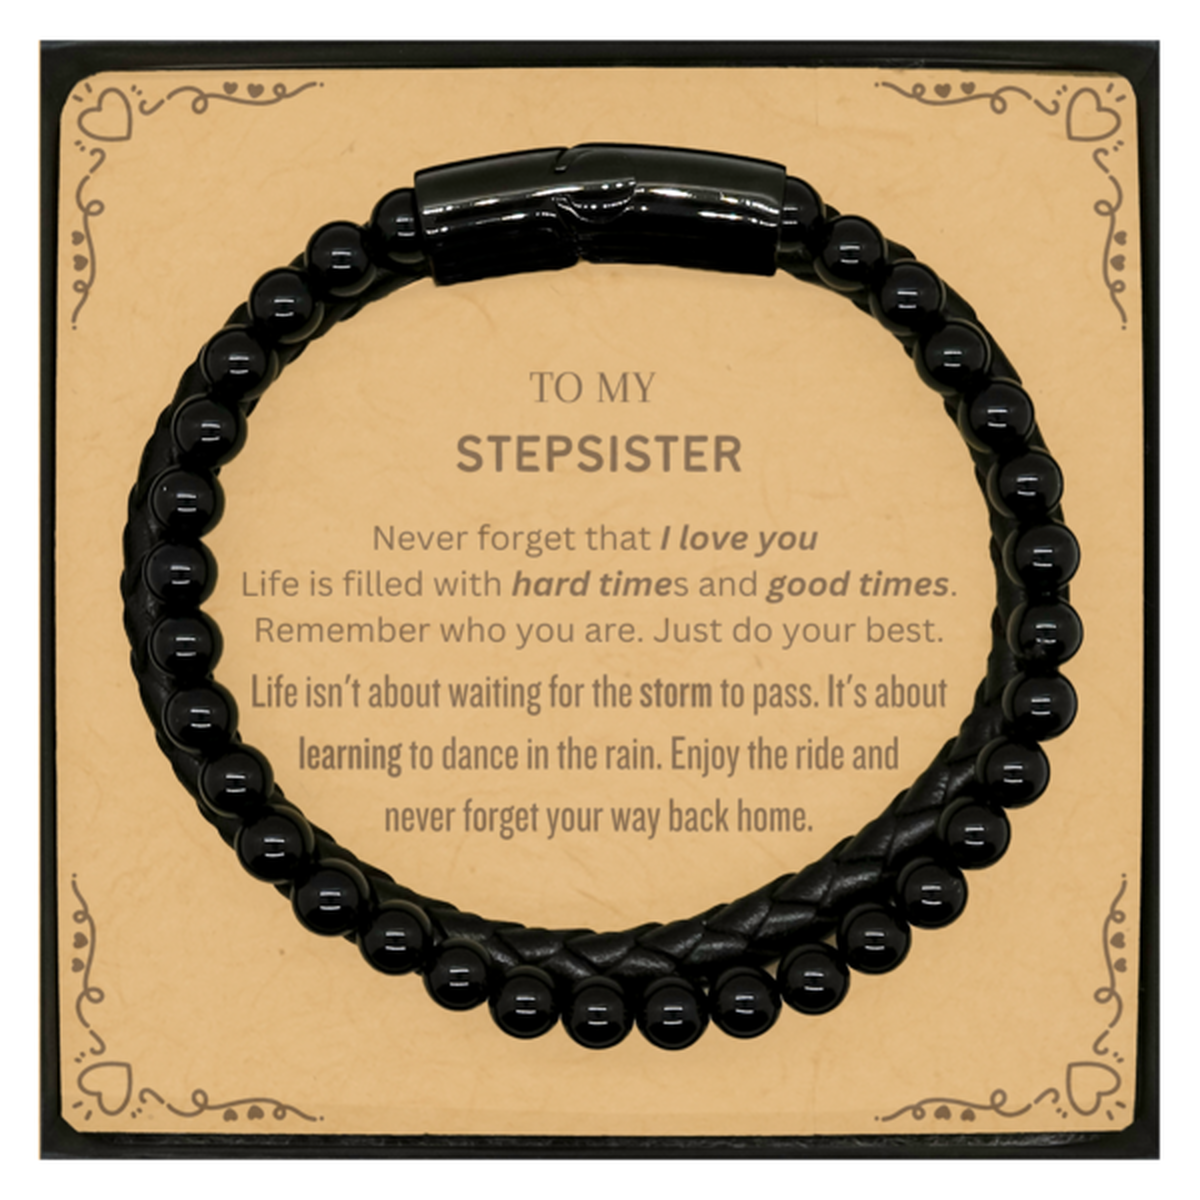 Christmas Stepsister Stone Leather Bracelets Gifts, To My Stepsister Birthday Thank You Gifts For Stepsister, Graduation Unique Gifts For Stepsister To My Stepsister Never forget that I love you life is filled with hard times and good times. Remember who